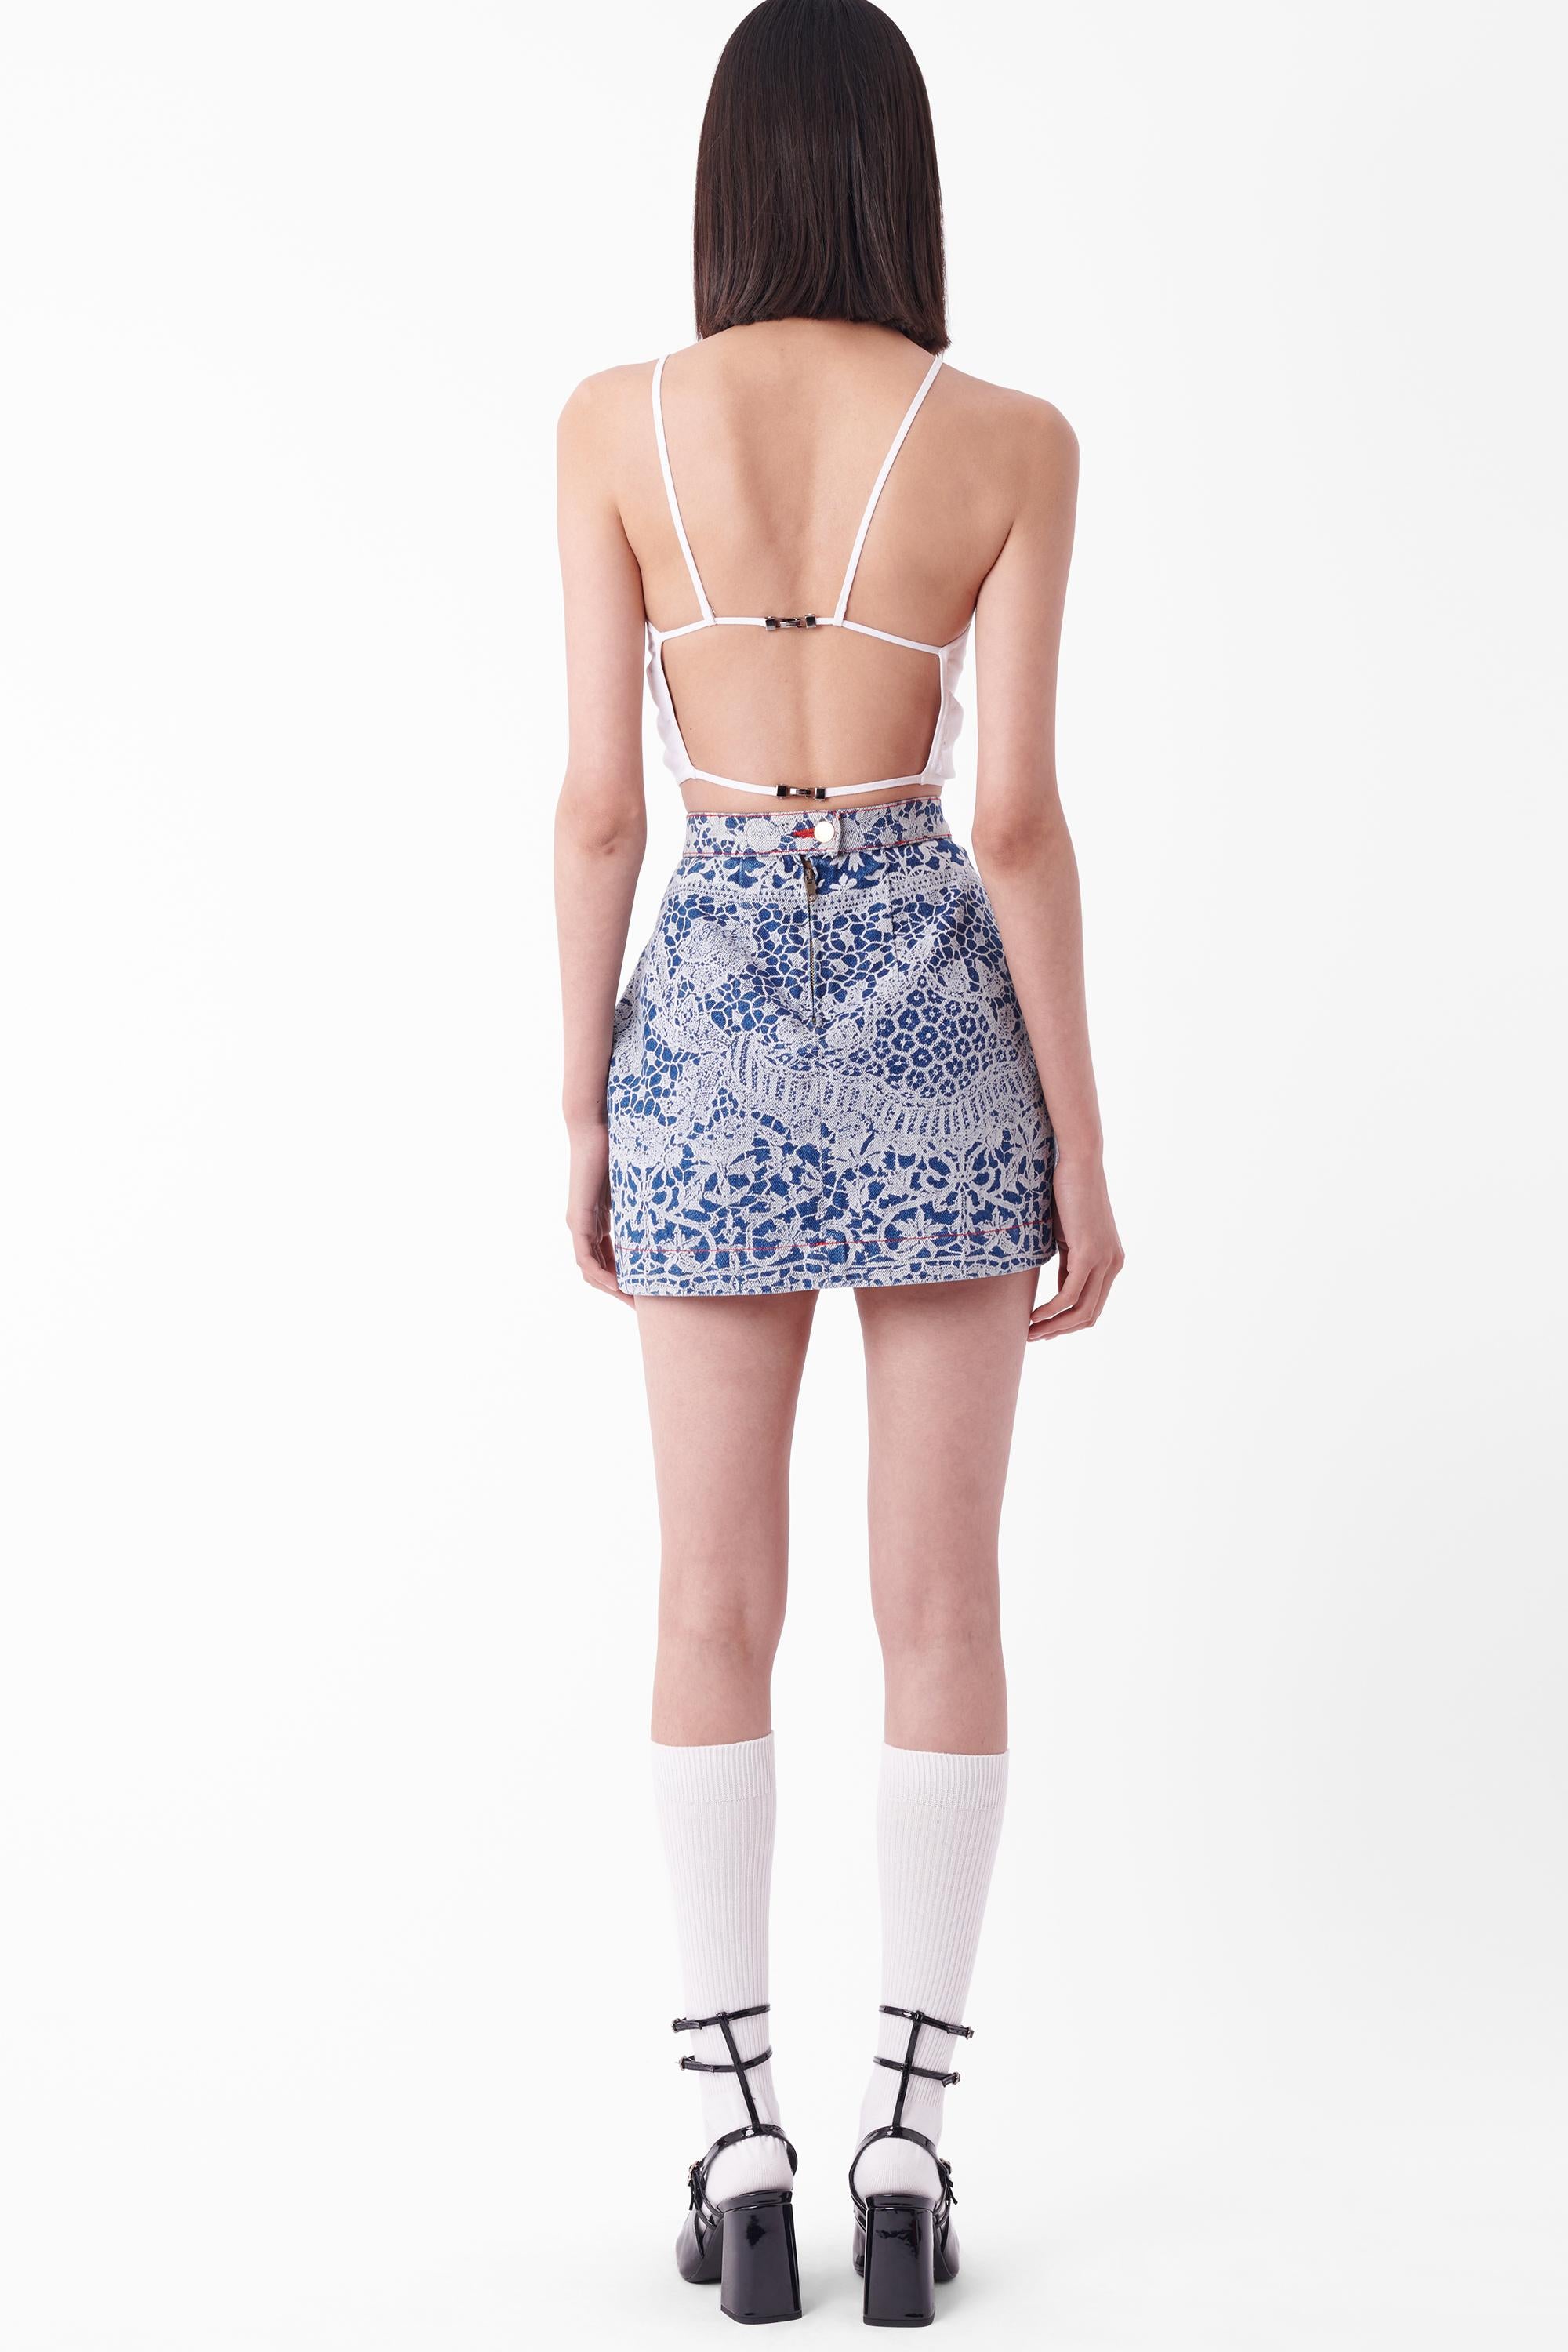 We are excited to present this Vintage Vivienne Westwood Fall Winter 1992 denim mini skirt, from the ‘Always On Camera’ collection. Features iconic lace print, waistline pleating and darting to create an a-line fit, red contrast stitching and double